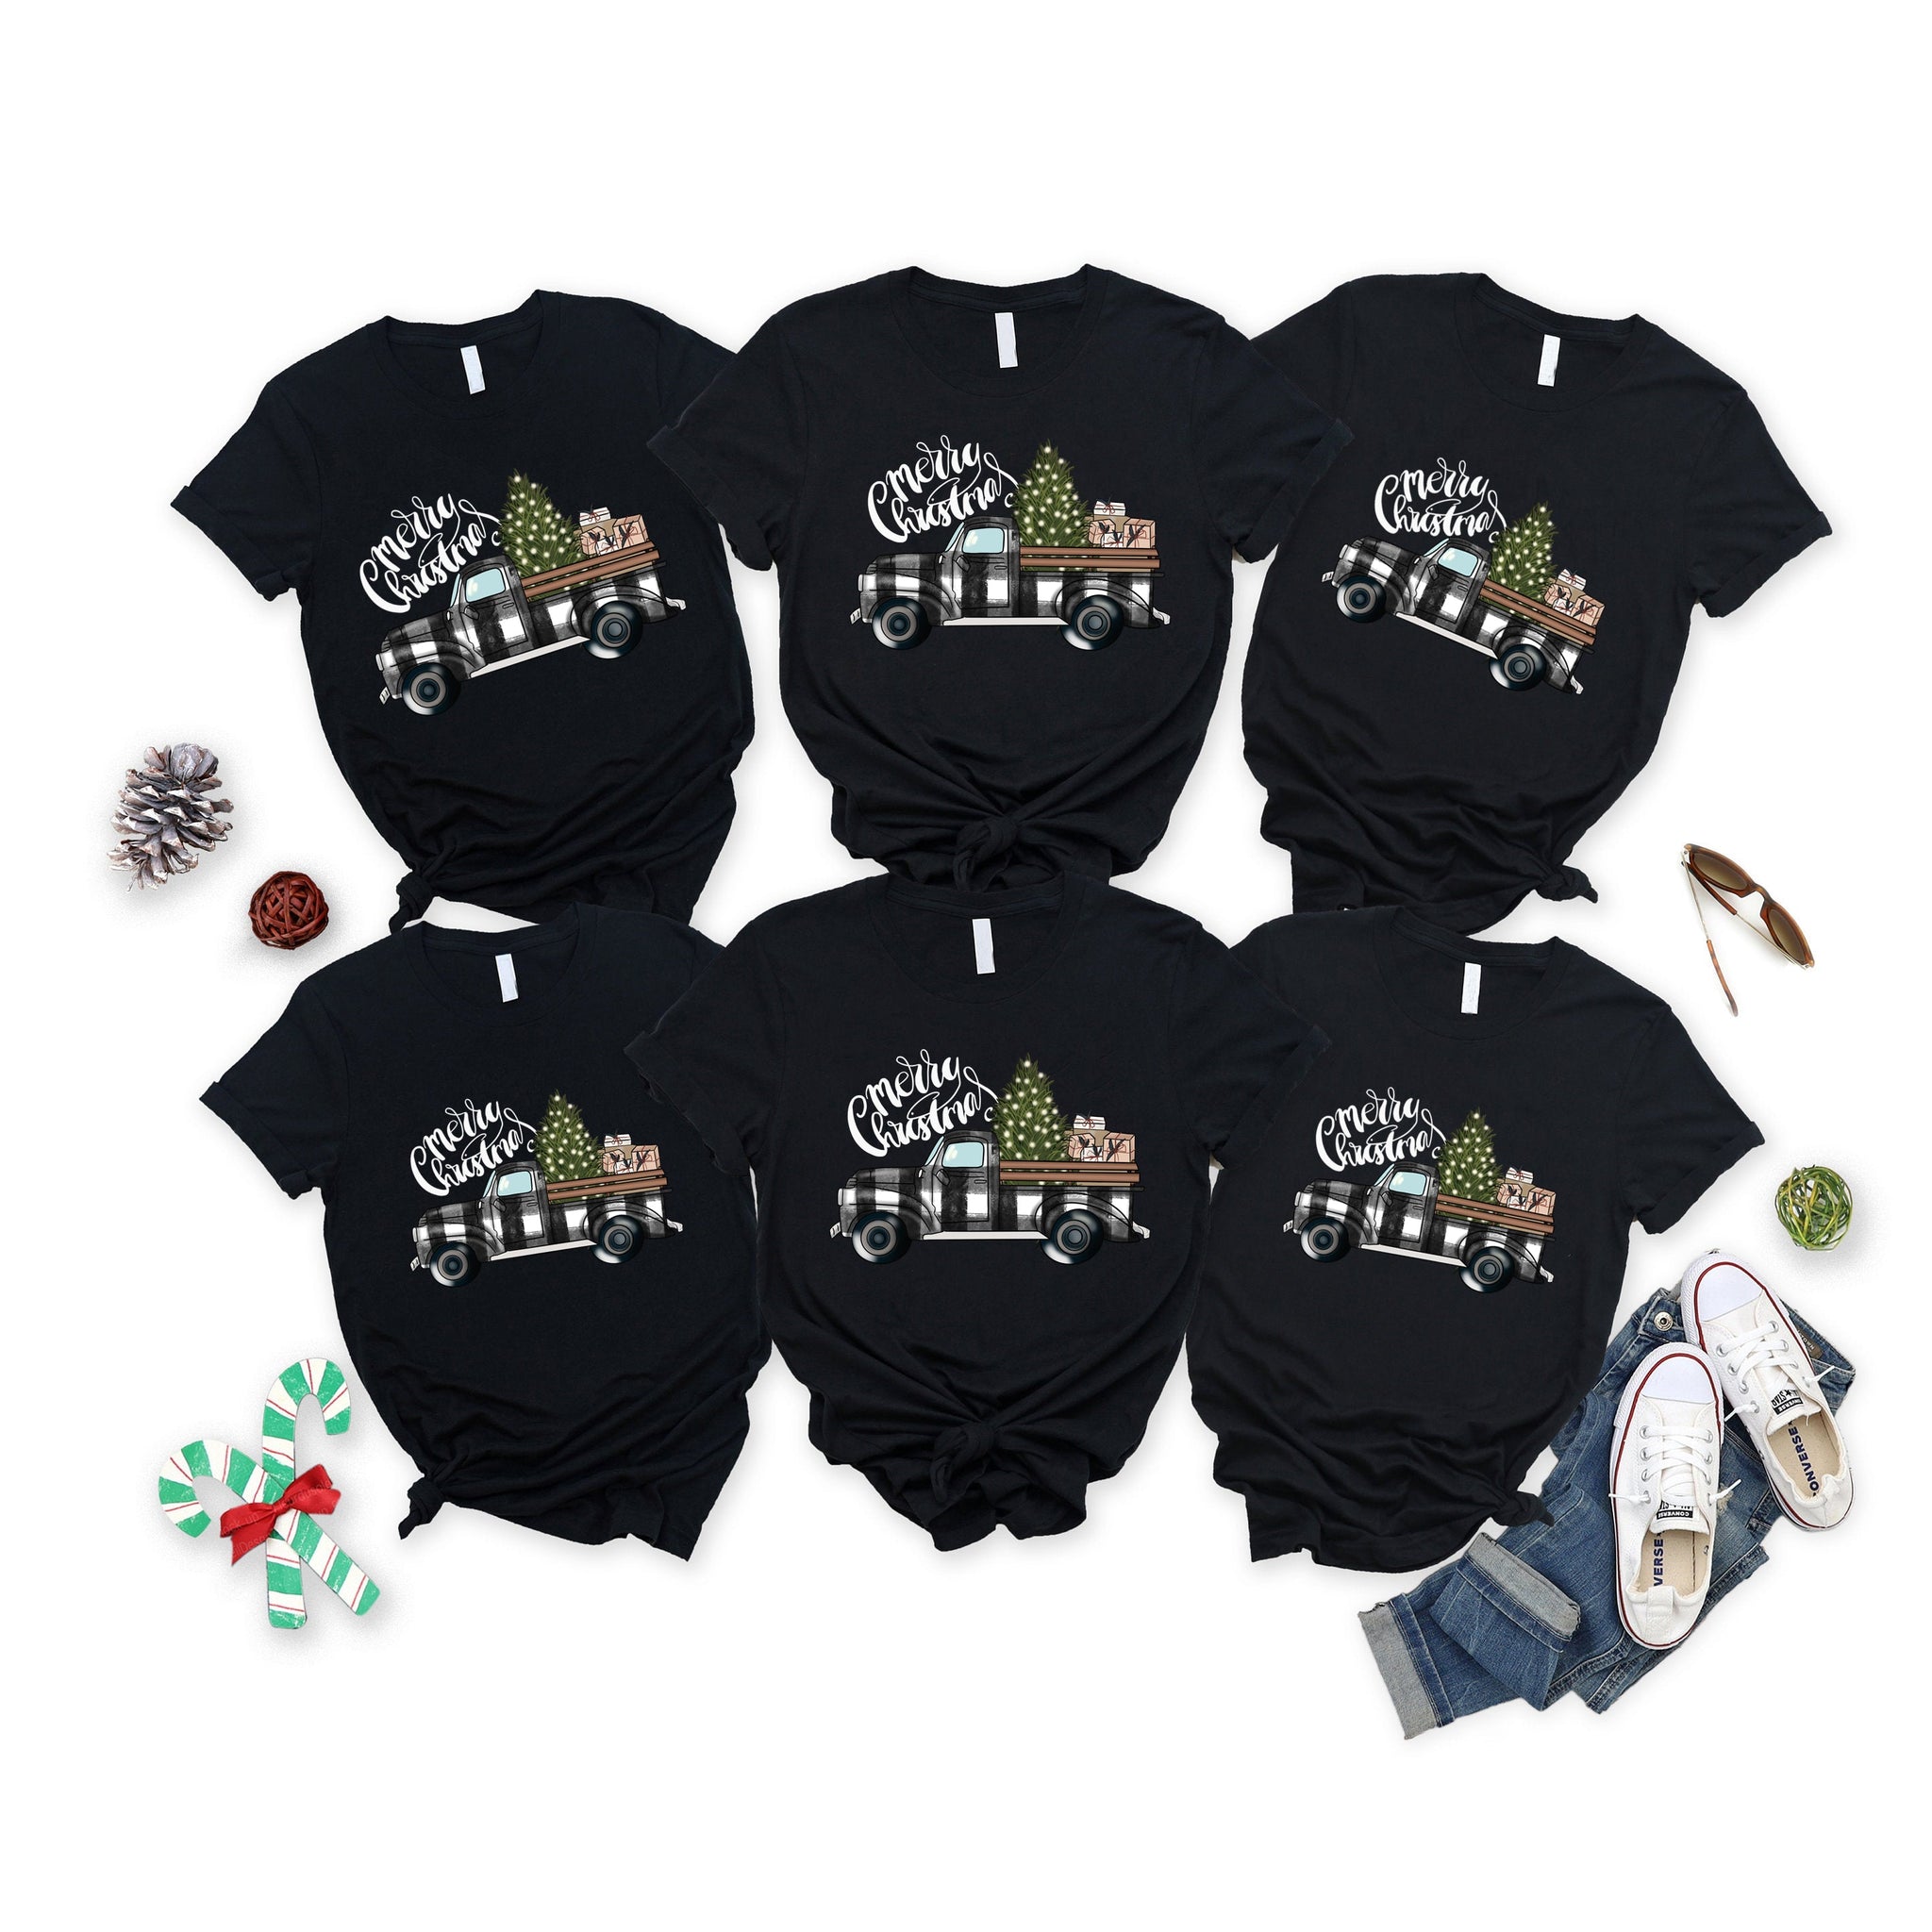 'Merry Chirstmas' Letter and ' A Car Of Gift' Pattern Family Christmas Matching Pajamas Tops Cute Black Short Sleeve T-shirts With Dog Bandana